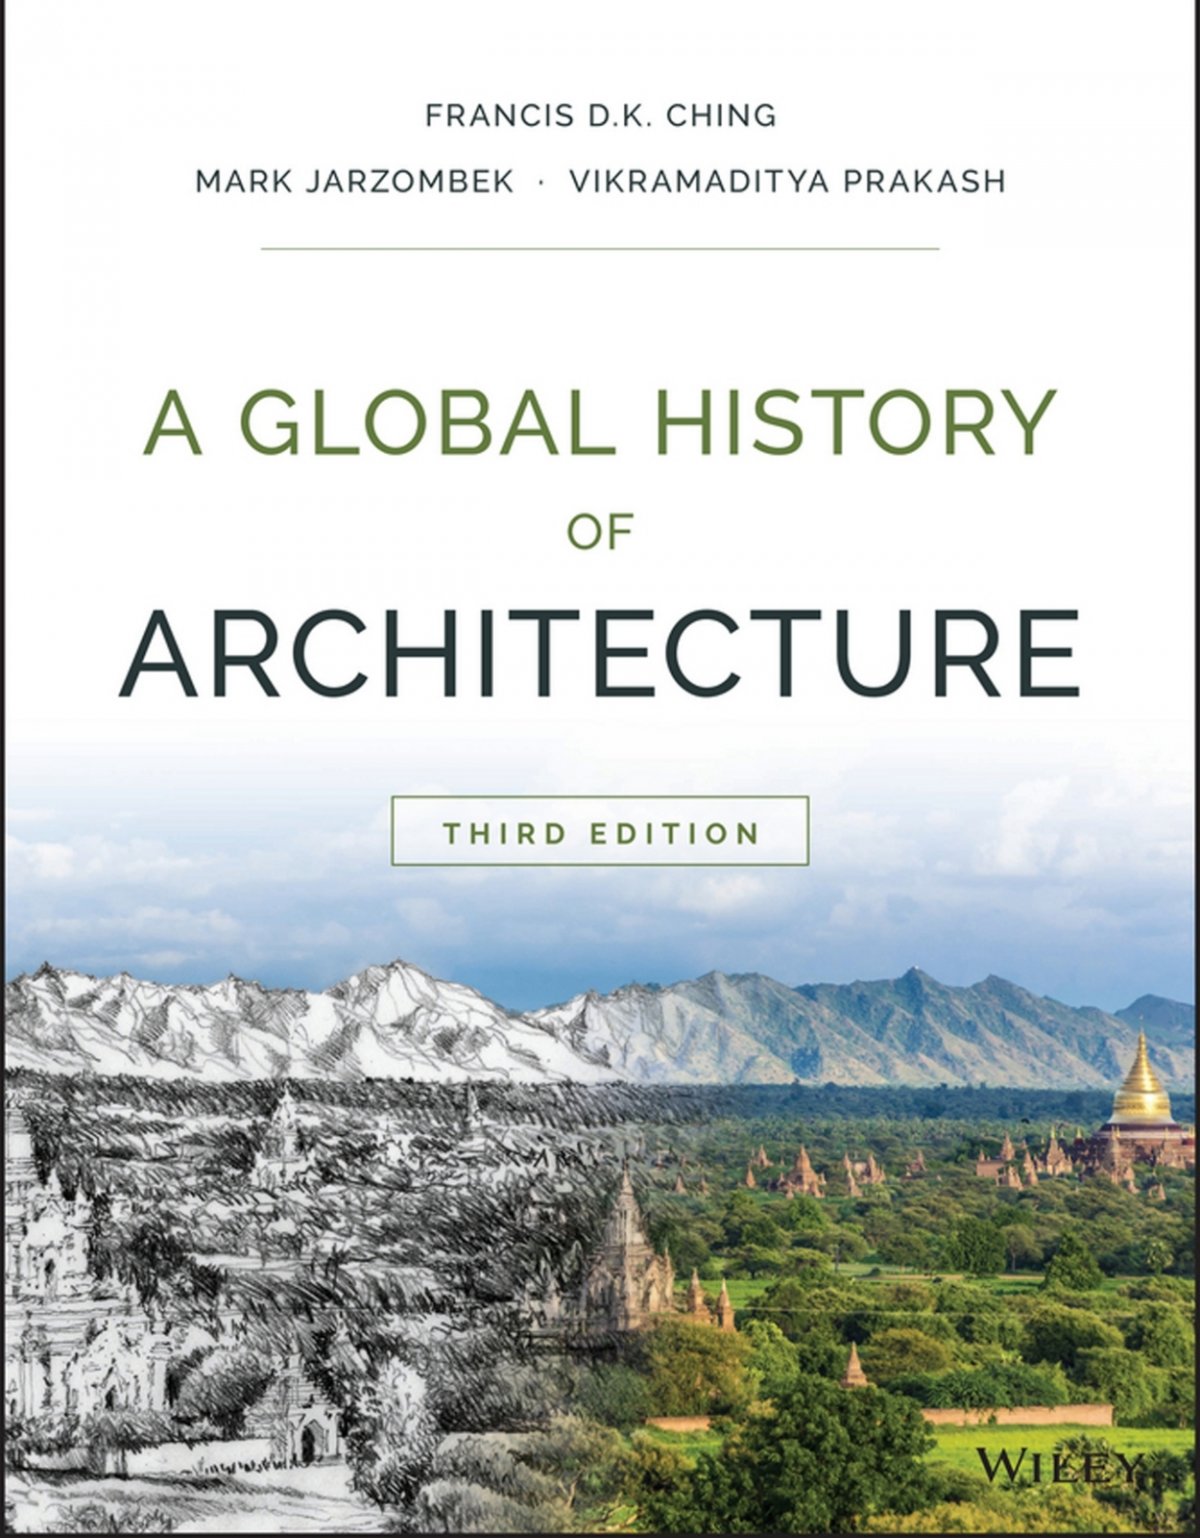 A Global History of Architecture ( PDFDrive.com )